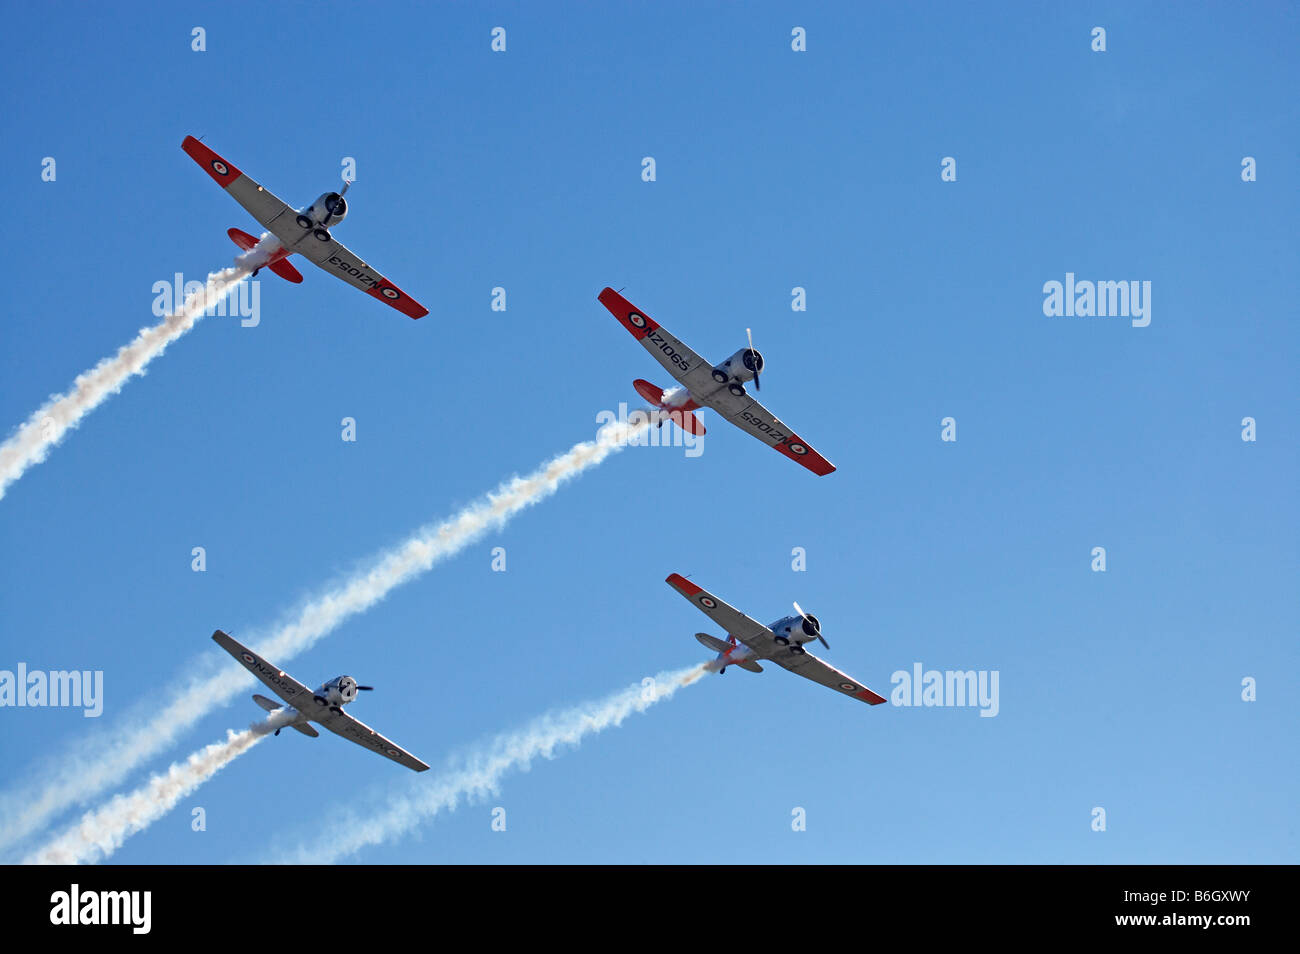 North American Harvards or T 6 Texans or SNJs Stock Photo